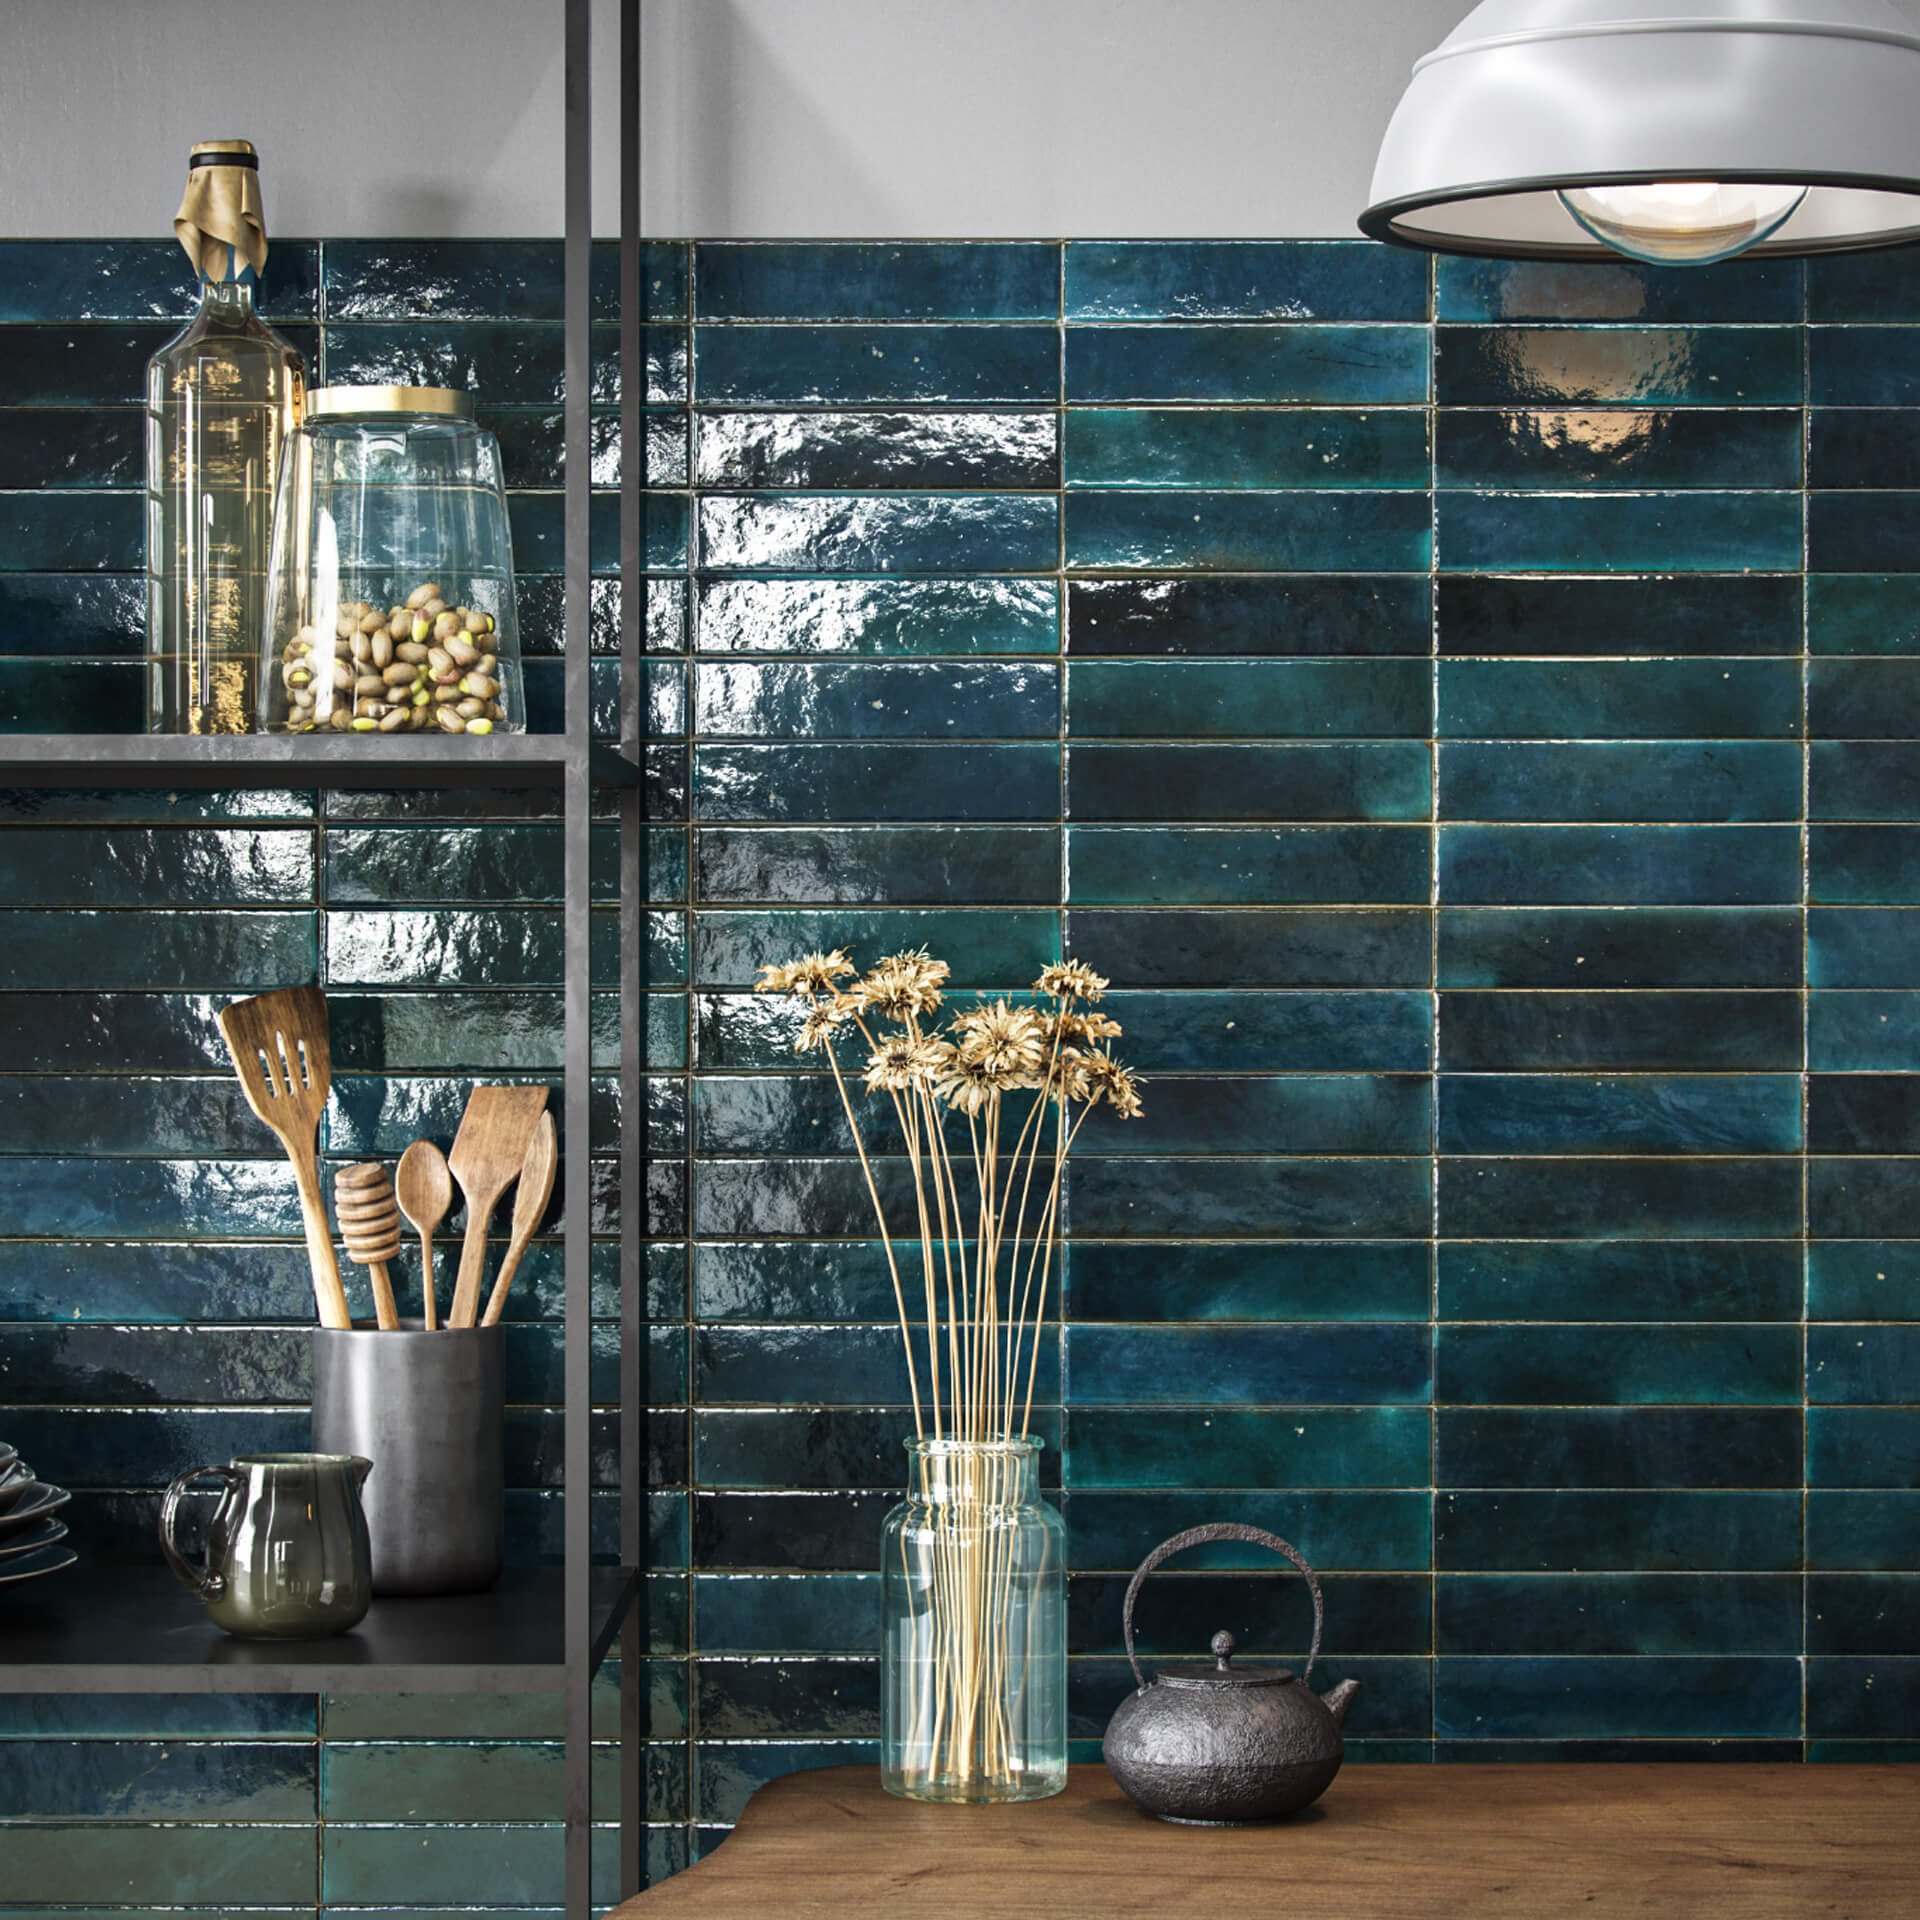 3D Rendering of Blue Wall Tiles in a Kitchen